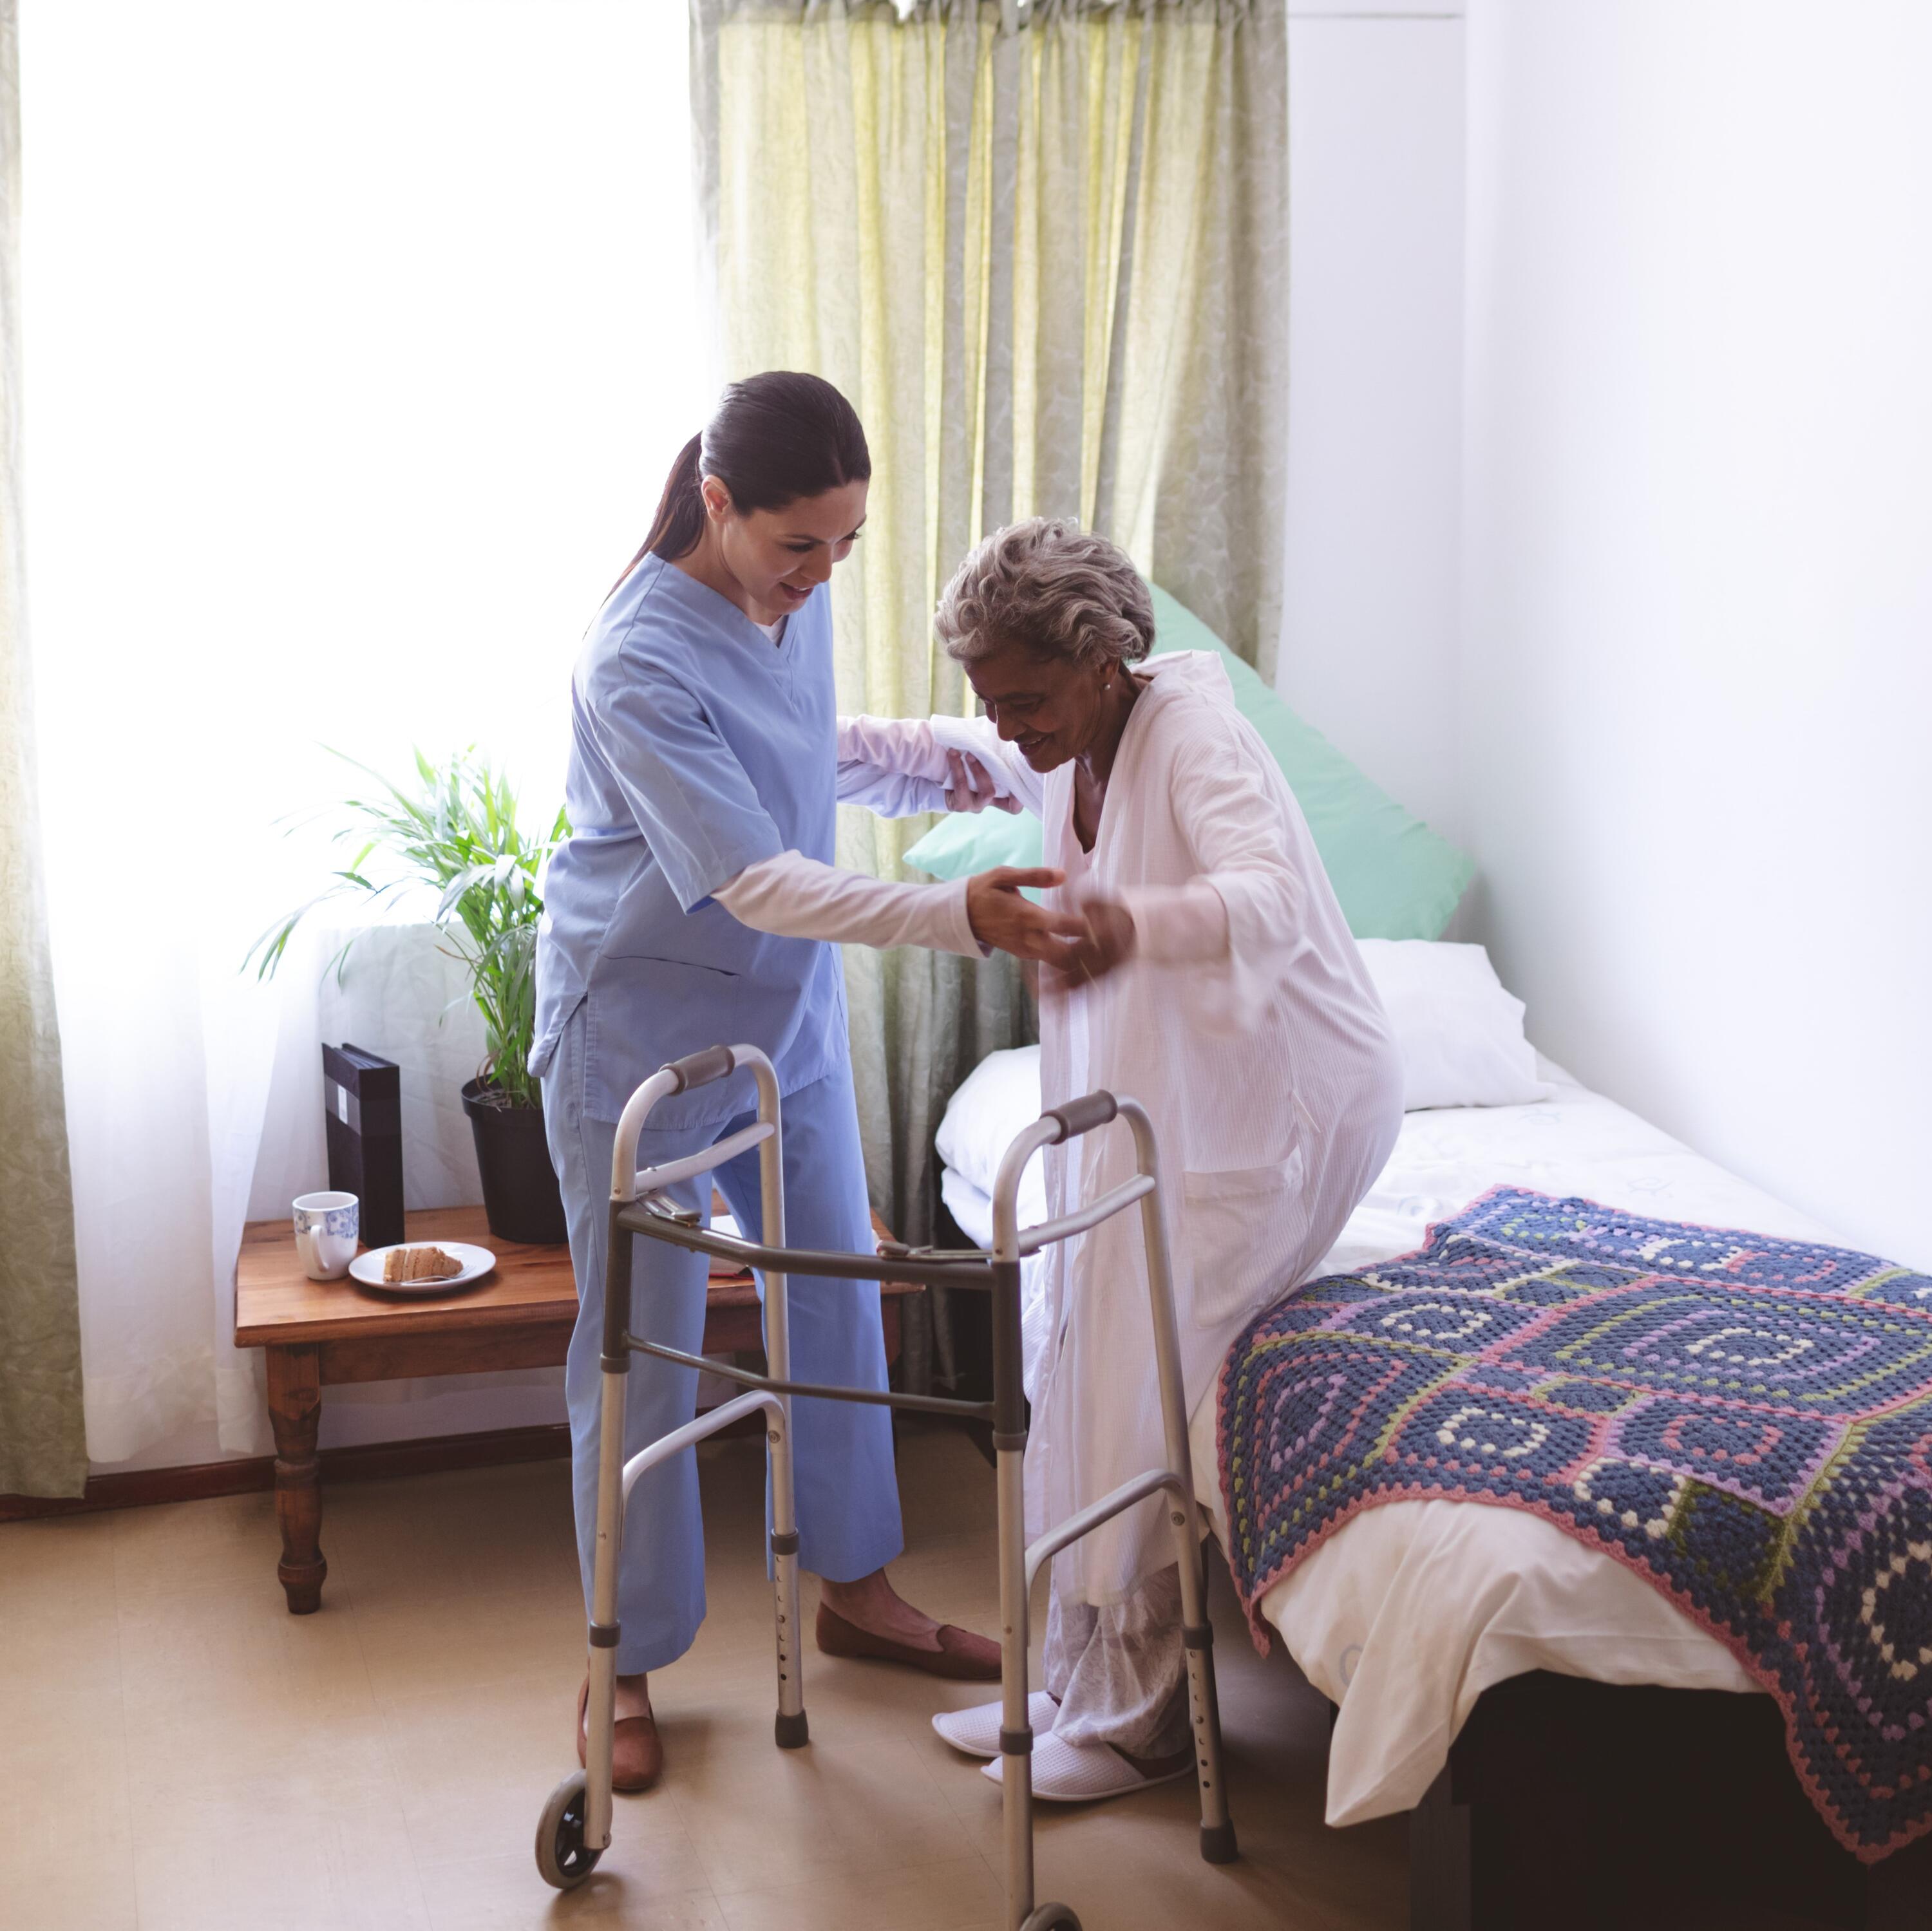 A nurse assisting a patient to stand up.